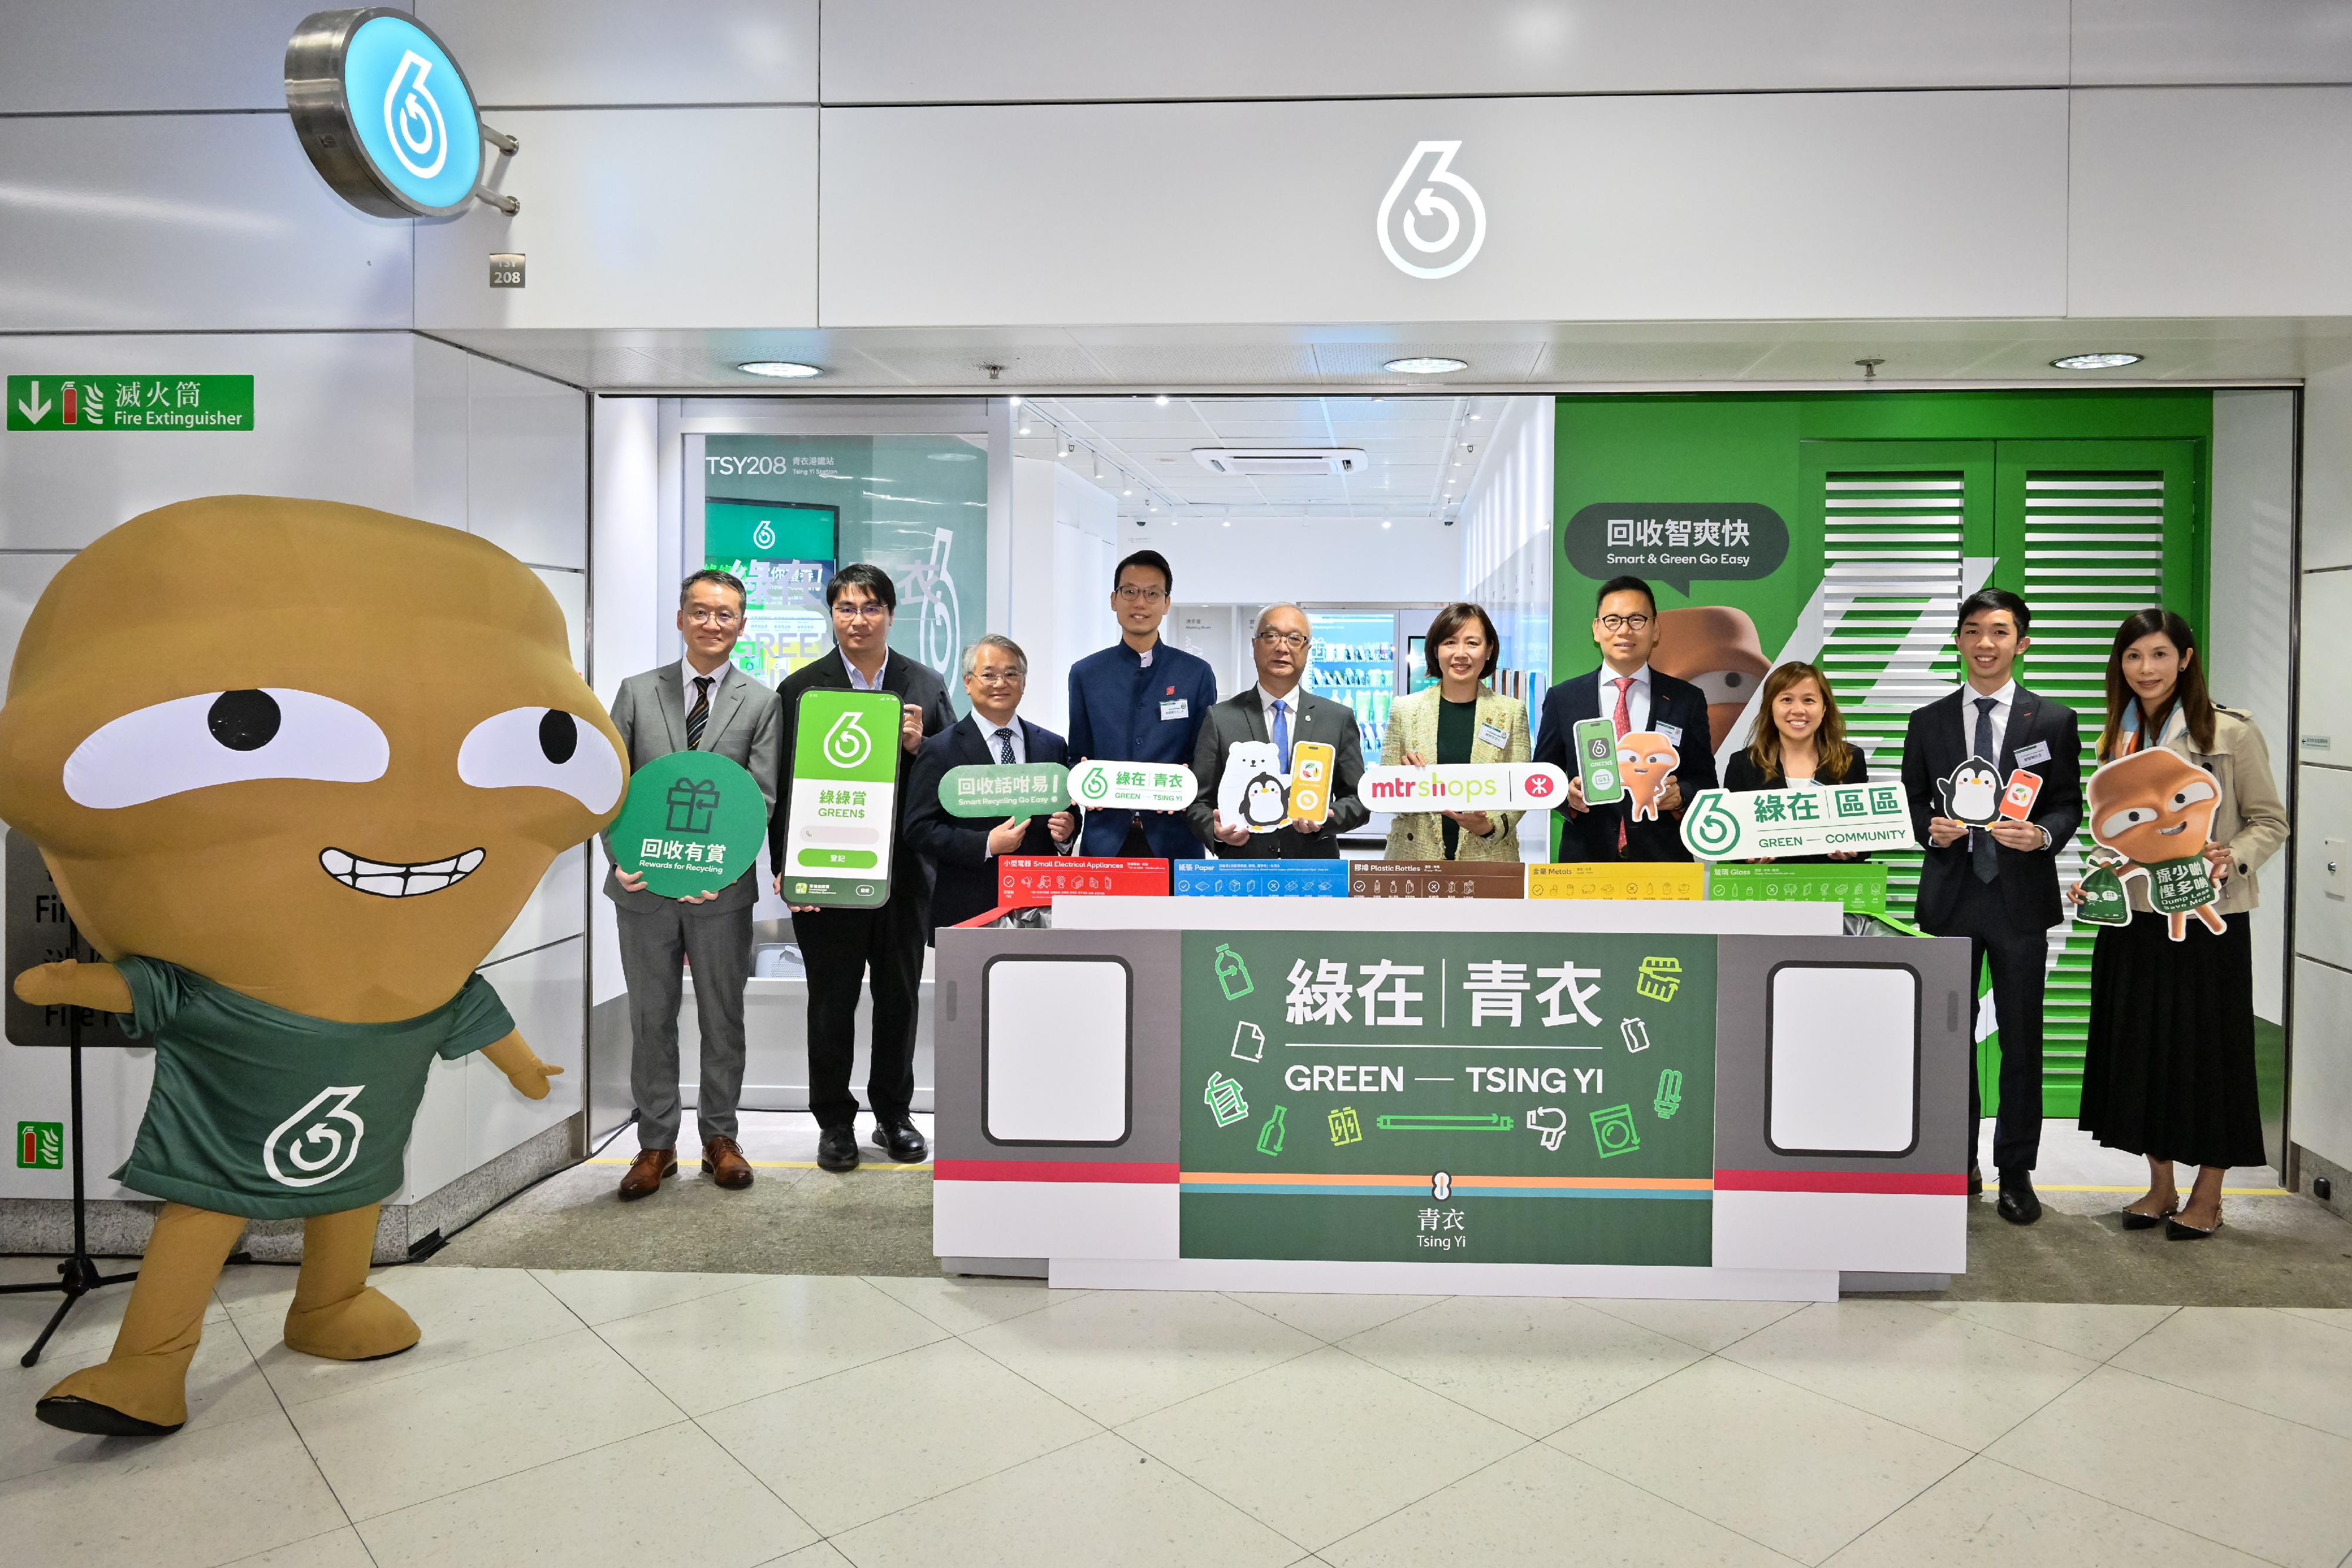 The Secretary for Environment and Ecology, Mr Tse Chin-wan, today (February 23) officiated at the opening ceremony of GREEN@TSING YI, witnessing the first GREEN@COMMUNITY recycling store set up in an MTR station. Photo shows Mr Tse (fifth left); the Director of Environmental Protection, Dr Samuel Chui (third left); the Deputy Director of Environmental Protection, Mr Bruno Luk (first left); and the Assistant Director of Environmental Protection, Dr Vanessa Au (first right), at the opening ceremony with other guests.